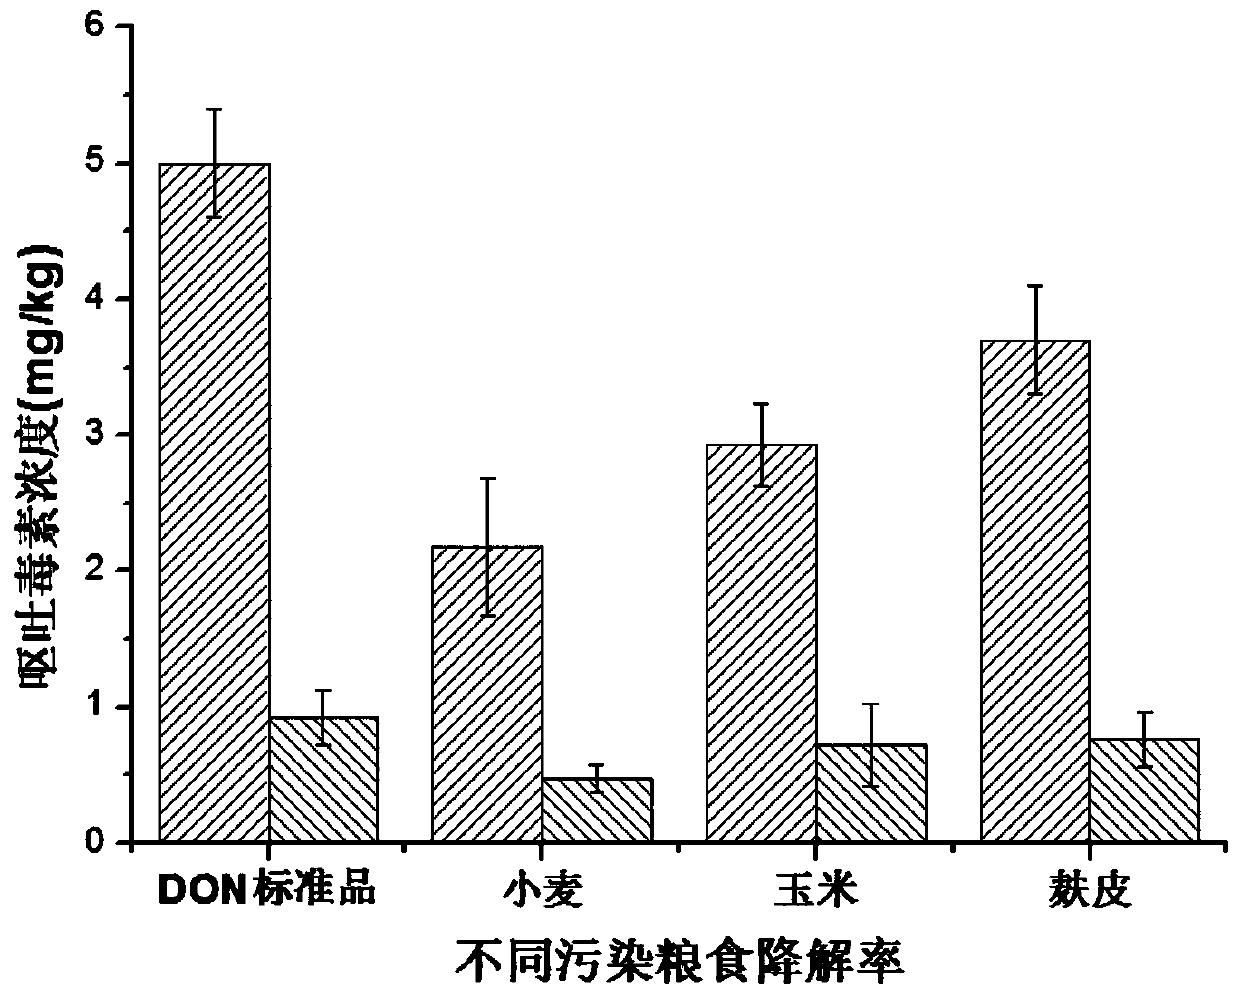 A method for rapidly and effectively degrading deoxynivalenol in grains